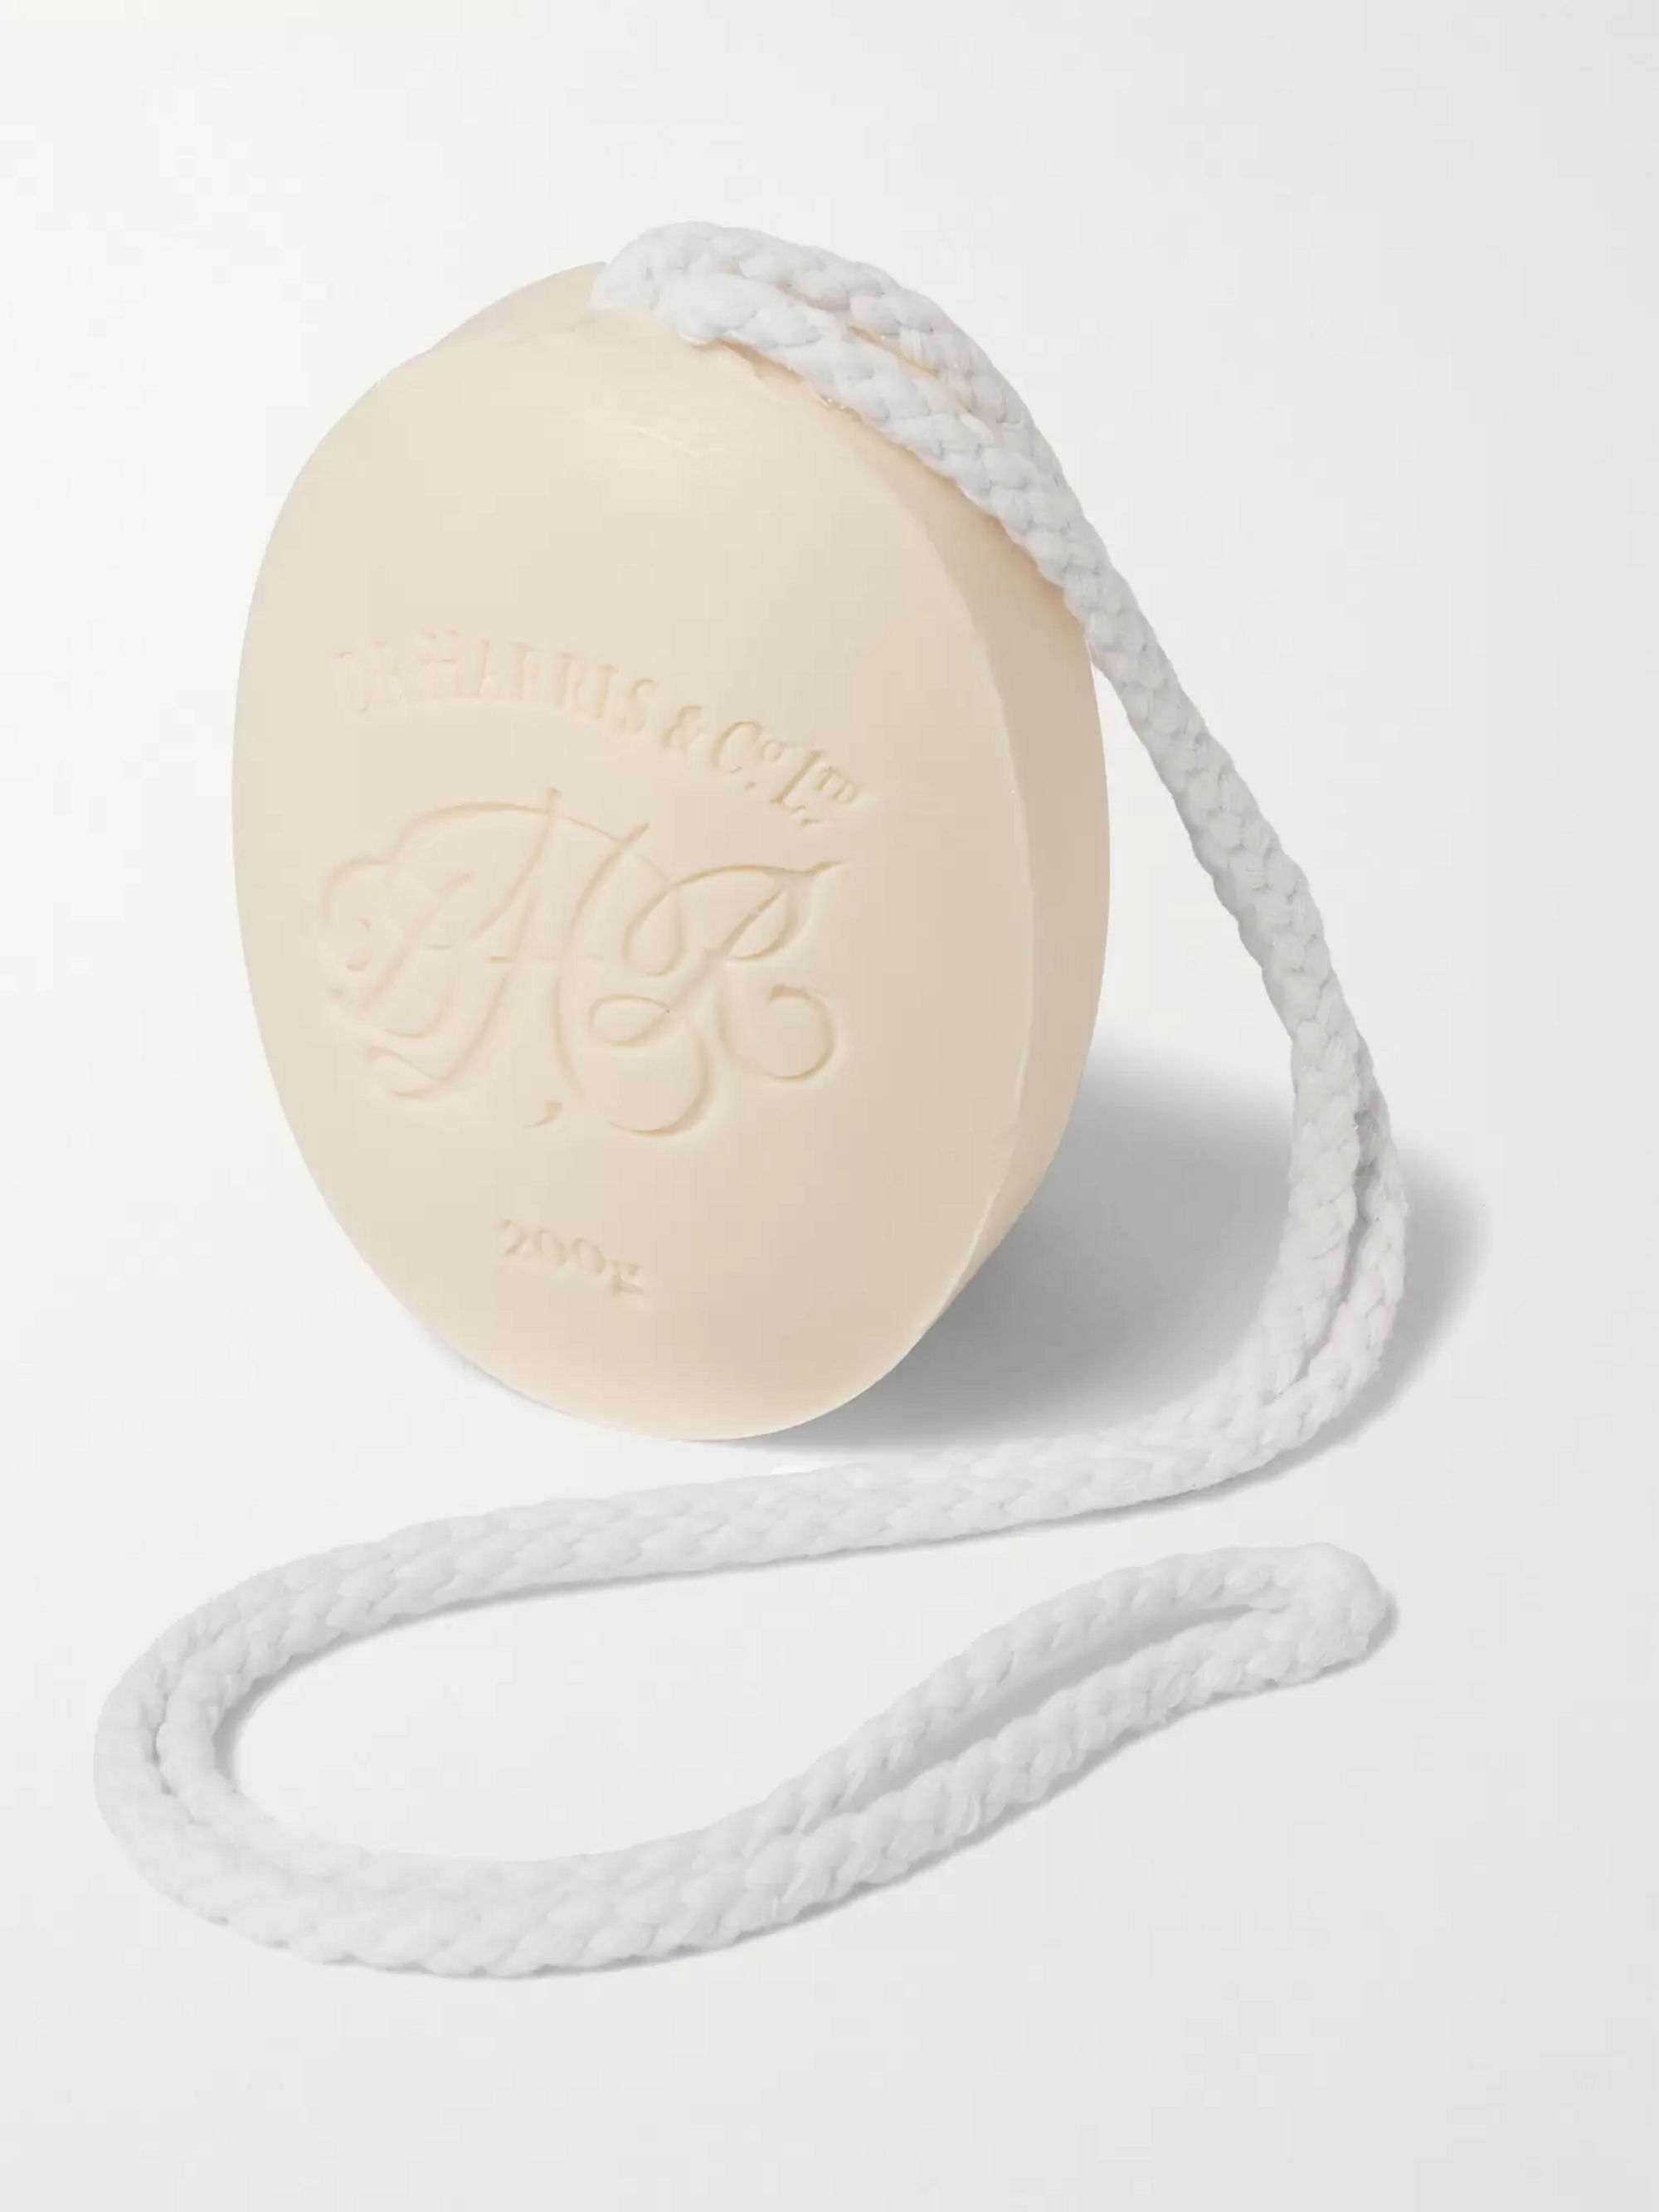 soap on a rope 70s